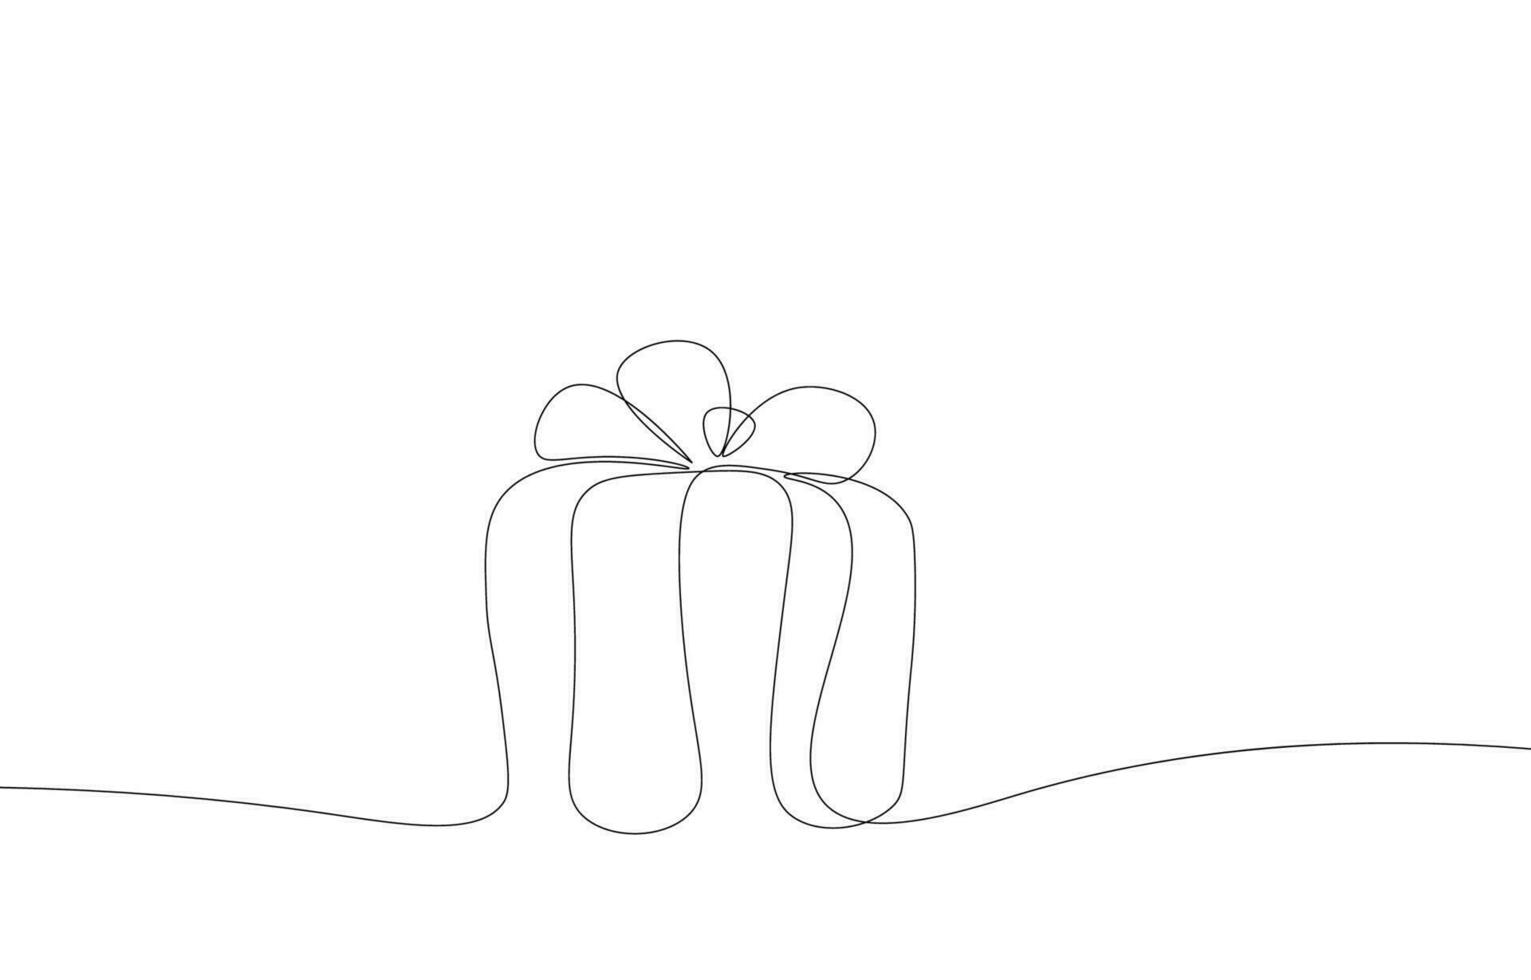 Continuous line gift box. Christmas and New Year wallpaper concept. Vector illustration minimalist style single line. Hand writing doodles on a white background.